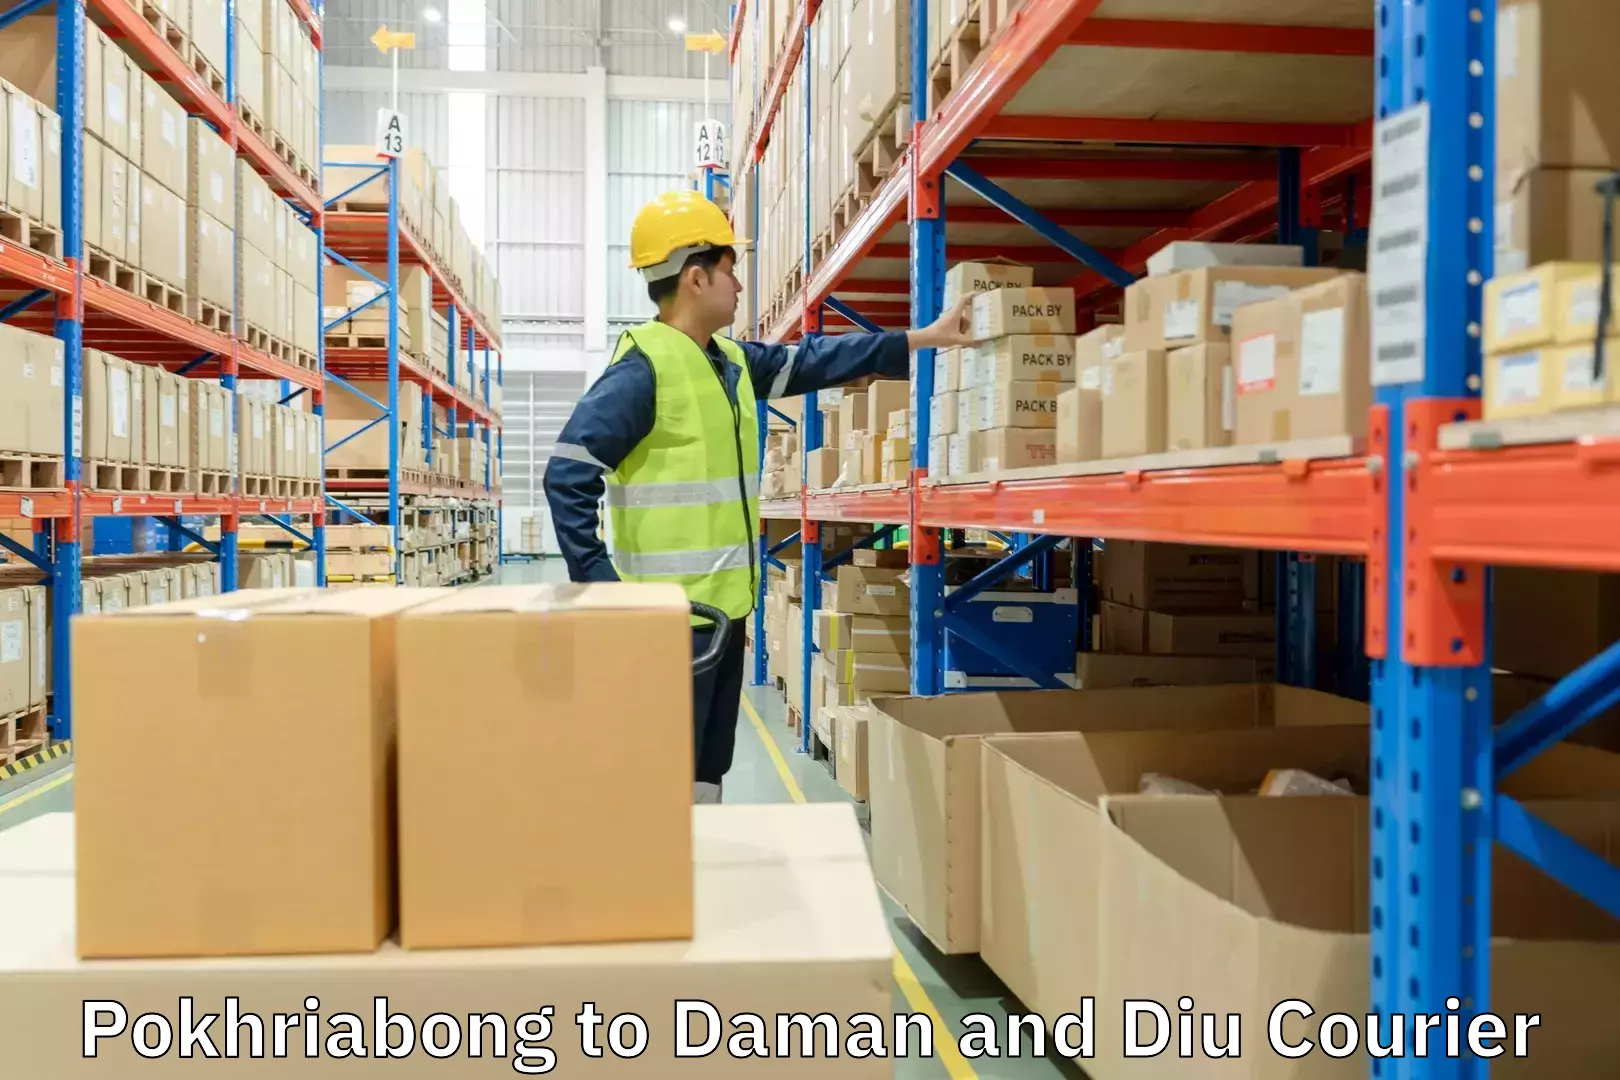 Easy return solutions in Pokhriabong to Daman and Diu